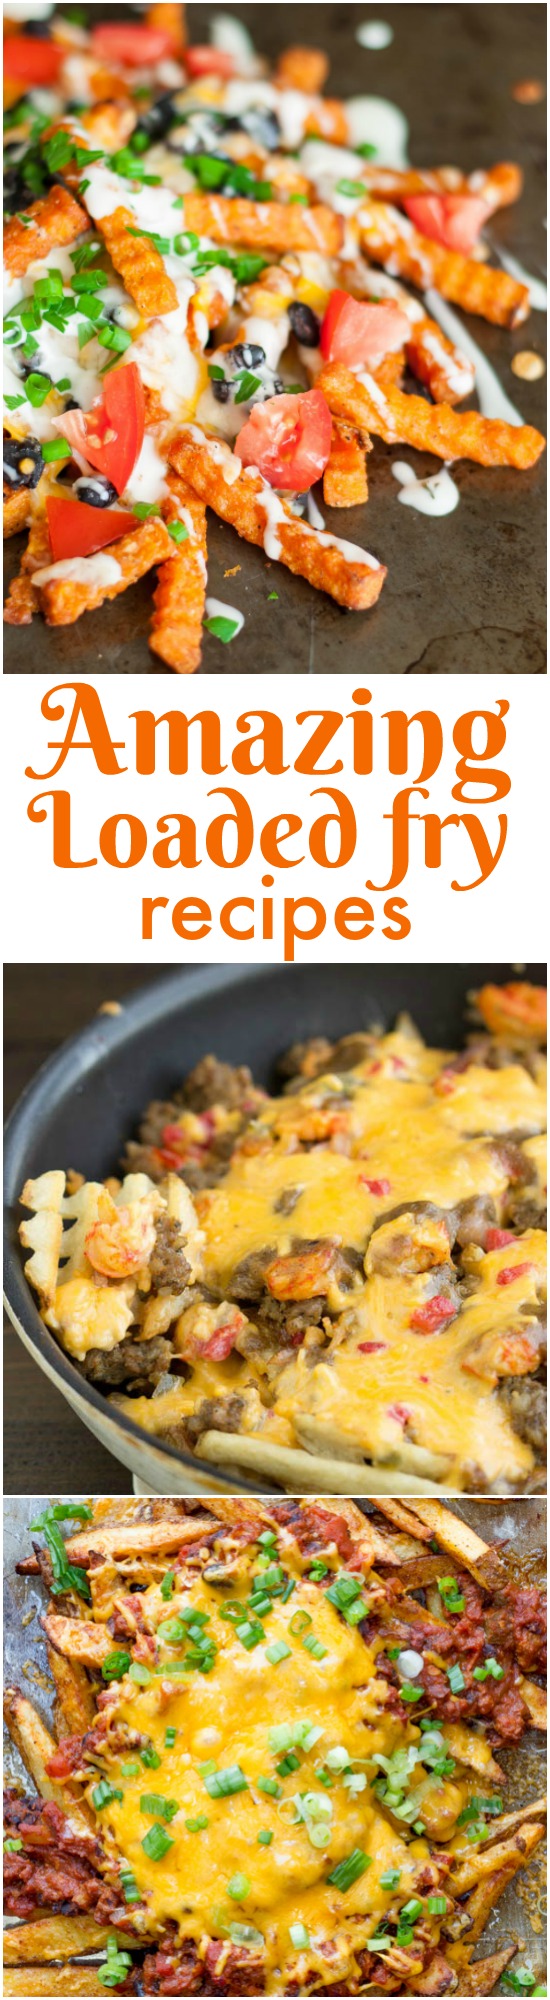 Amazing Loaded Fry Recipes that Go with Everything for you to indulge! Whether topped with pizza toppings, nacho toppings, or smoked pull pork, loaded fries are the ultimate snack food.